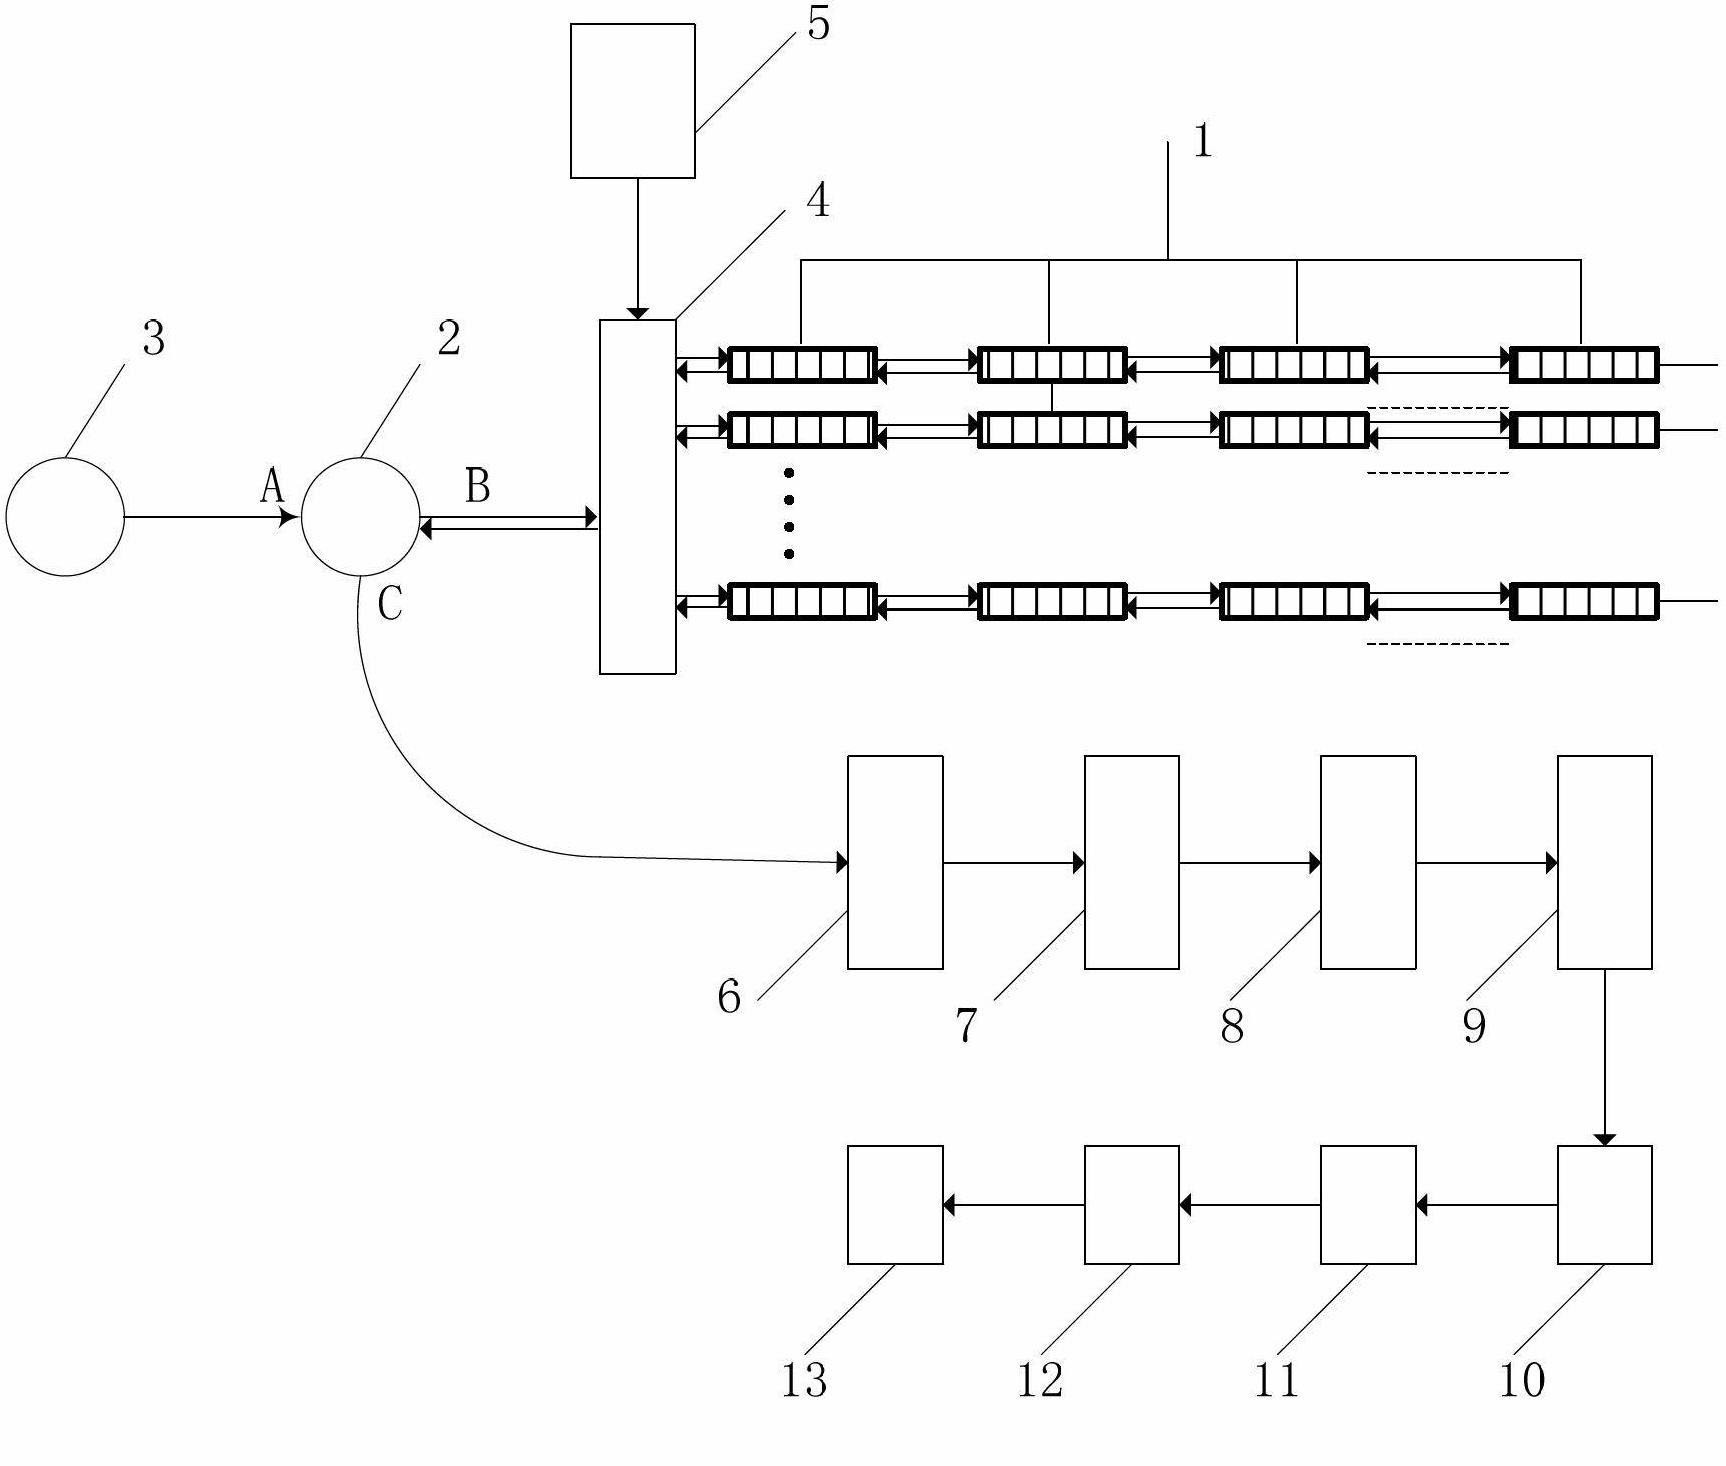 Fiber grating temperature sensing system for detecting temperatures of inflammables and explosives